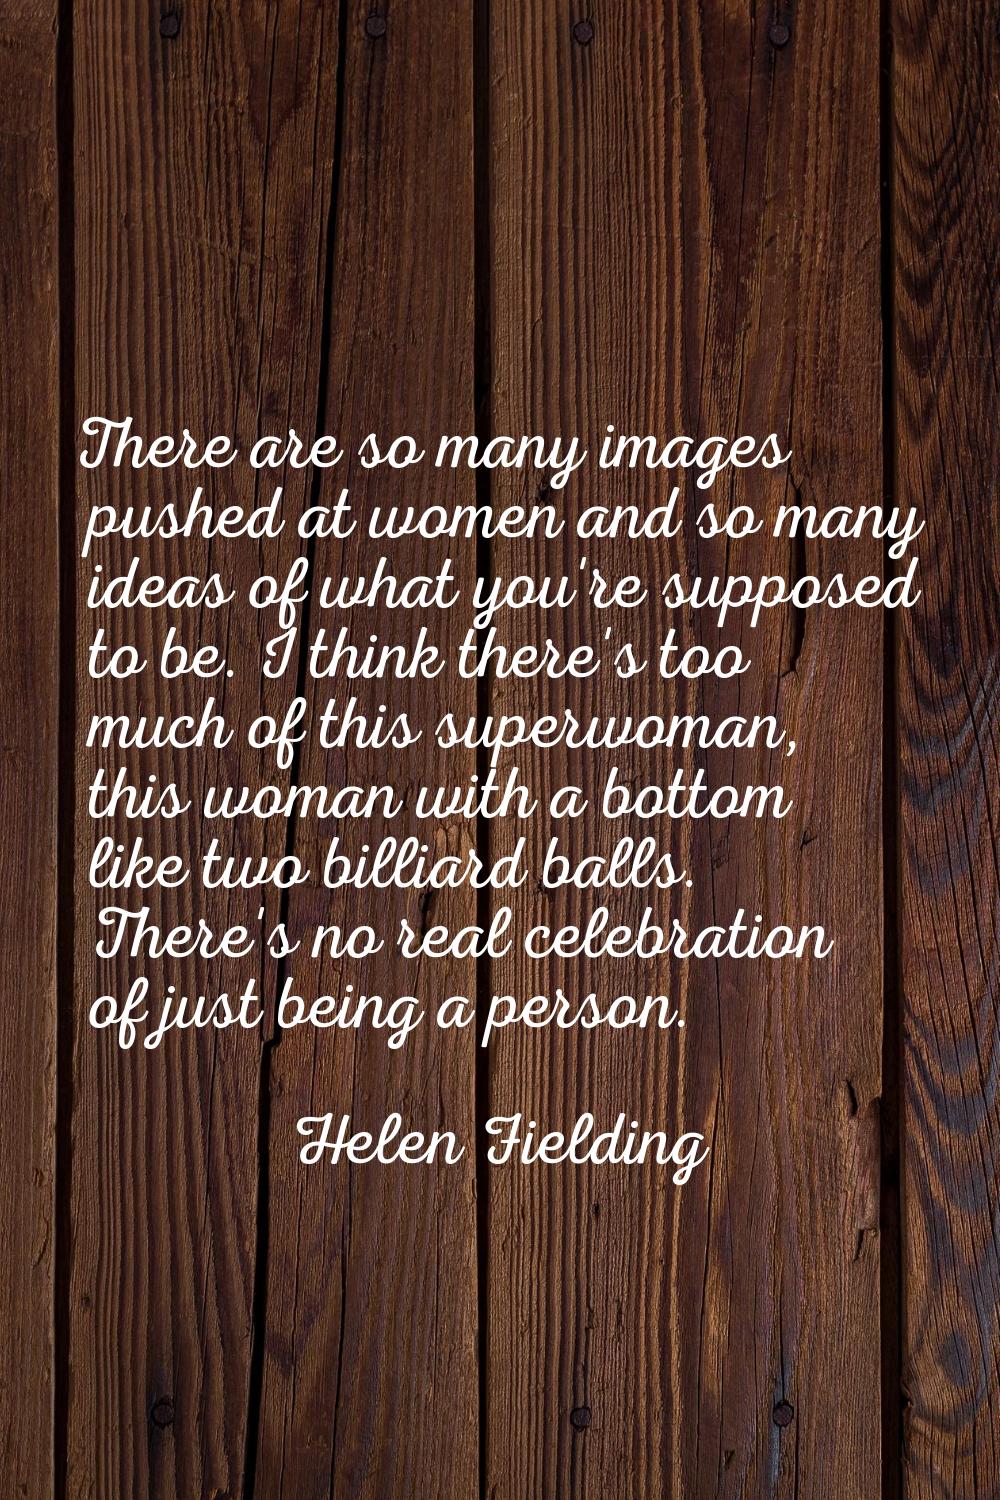 There are so many images pushed at women and so many ideas of what you're supposed to be. I think t